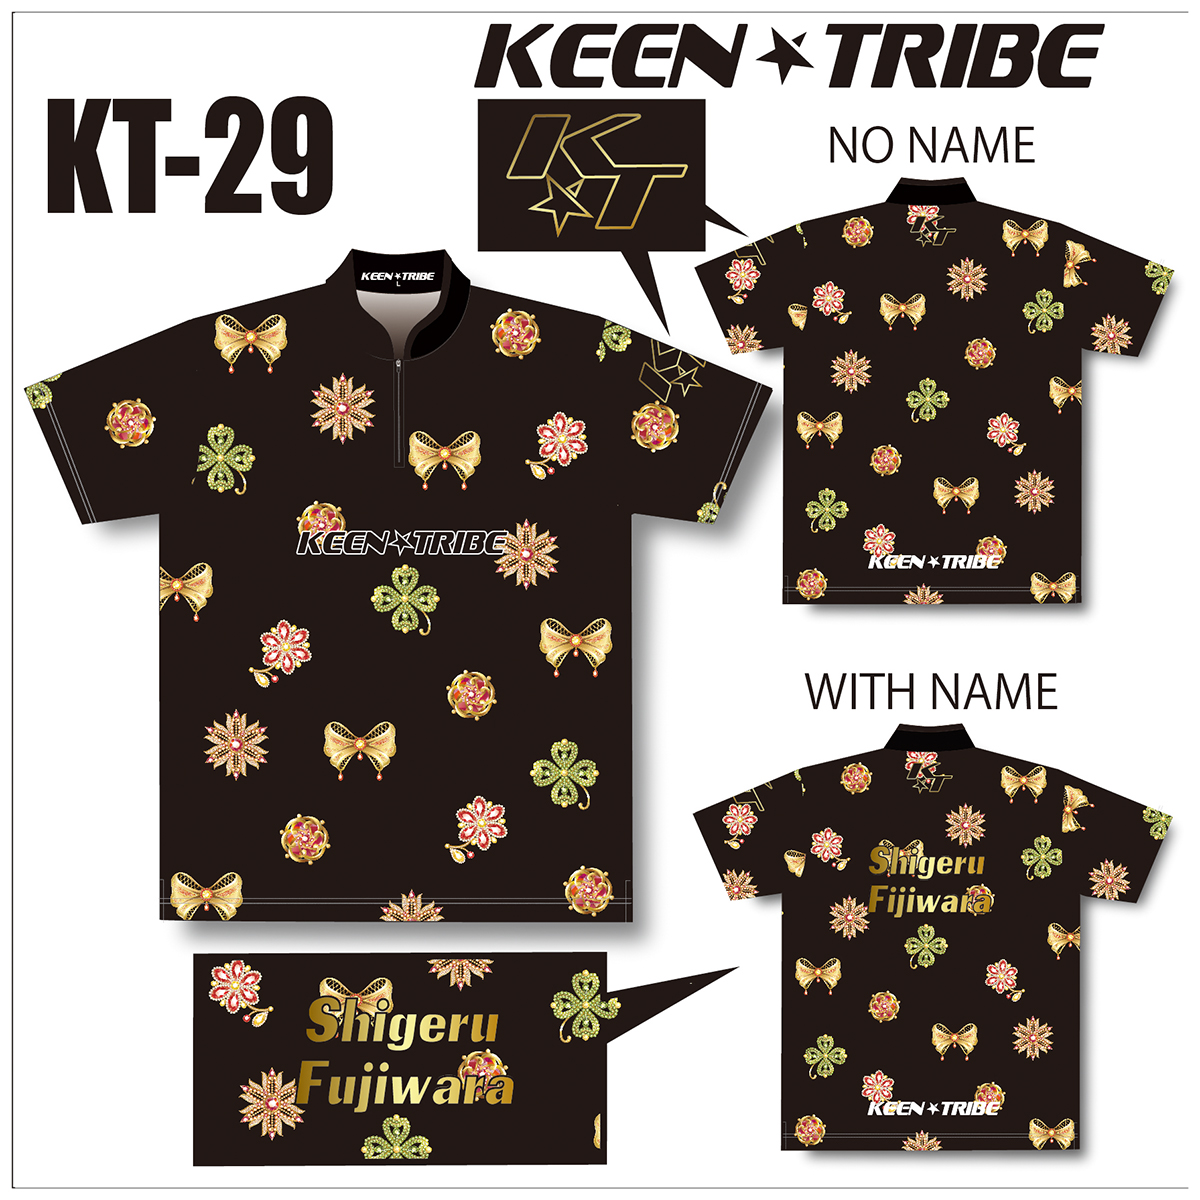 KEEN ★ TRIBE　KT-29(受注生産)